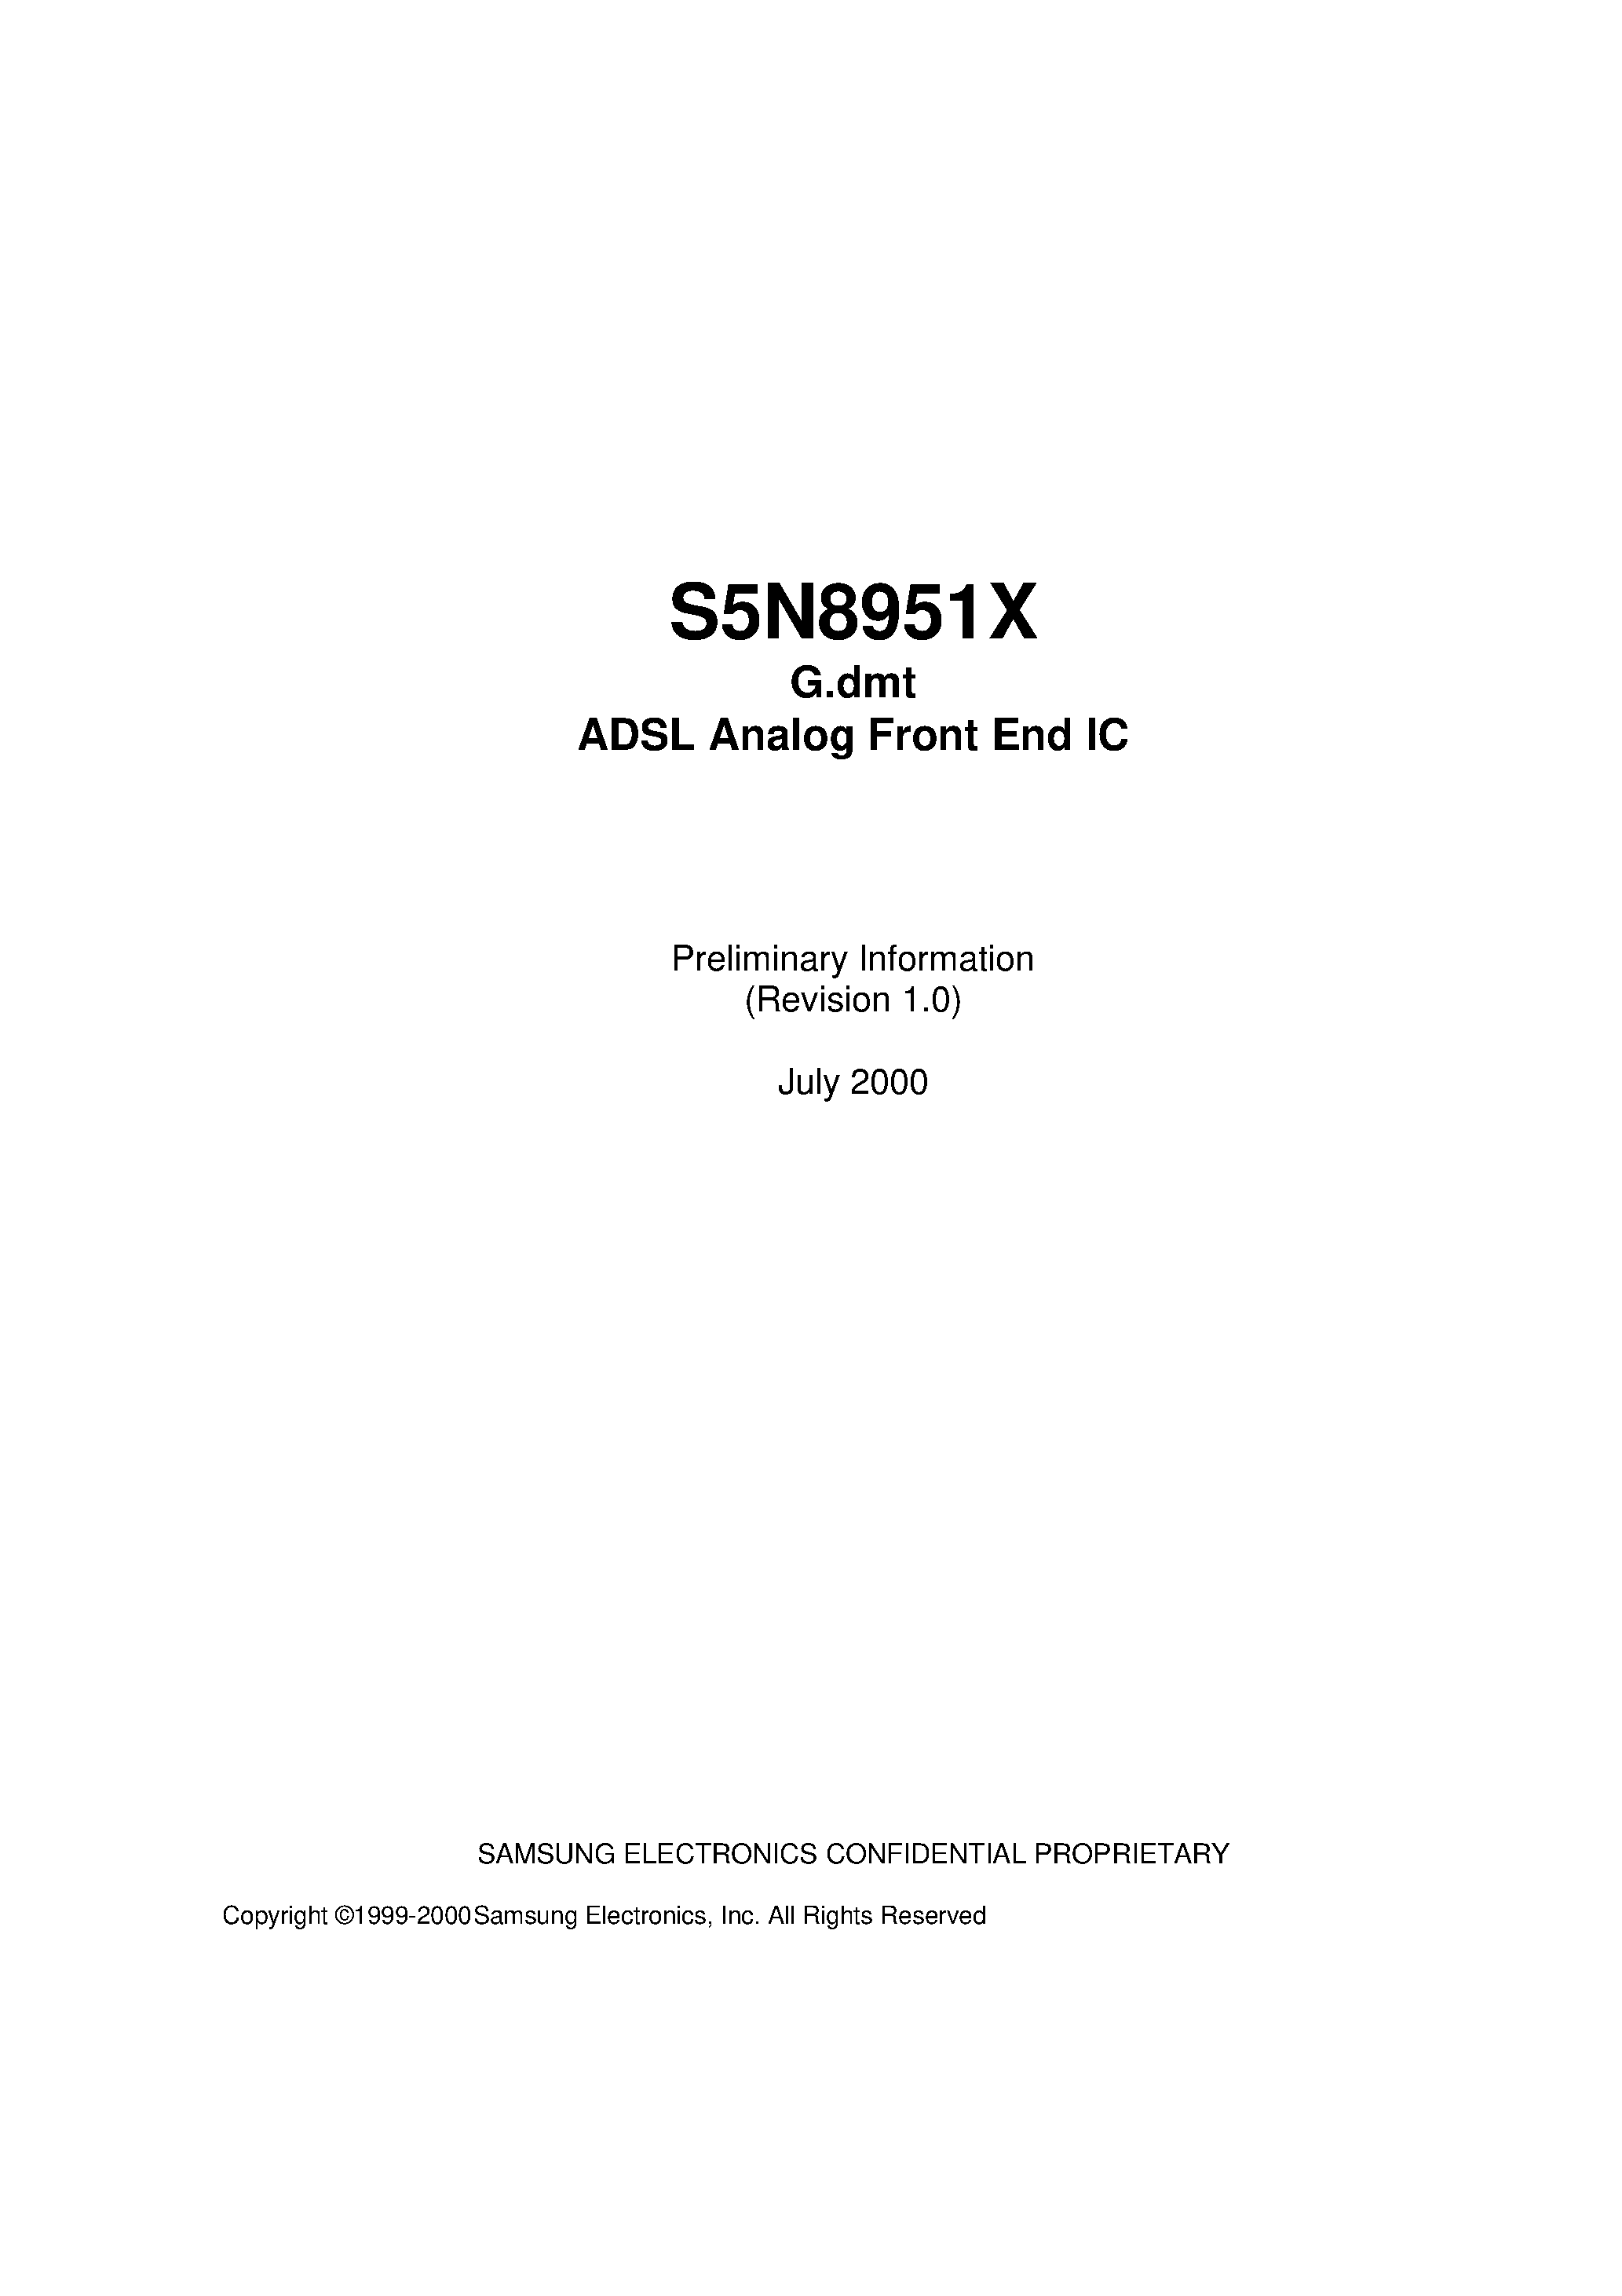 Datasheet S5N8951X - G.dmt ADSL Analog Front End IC page 1